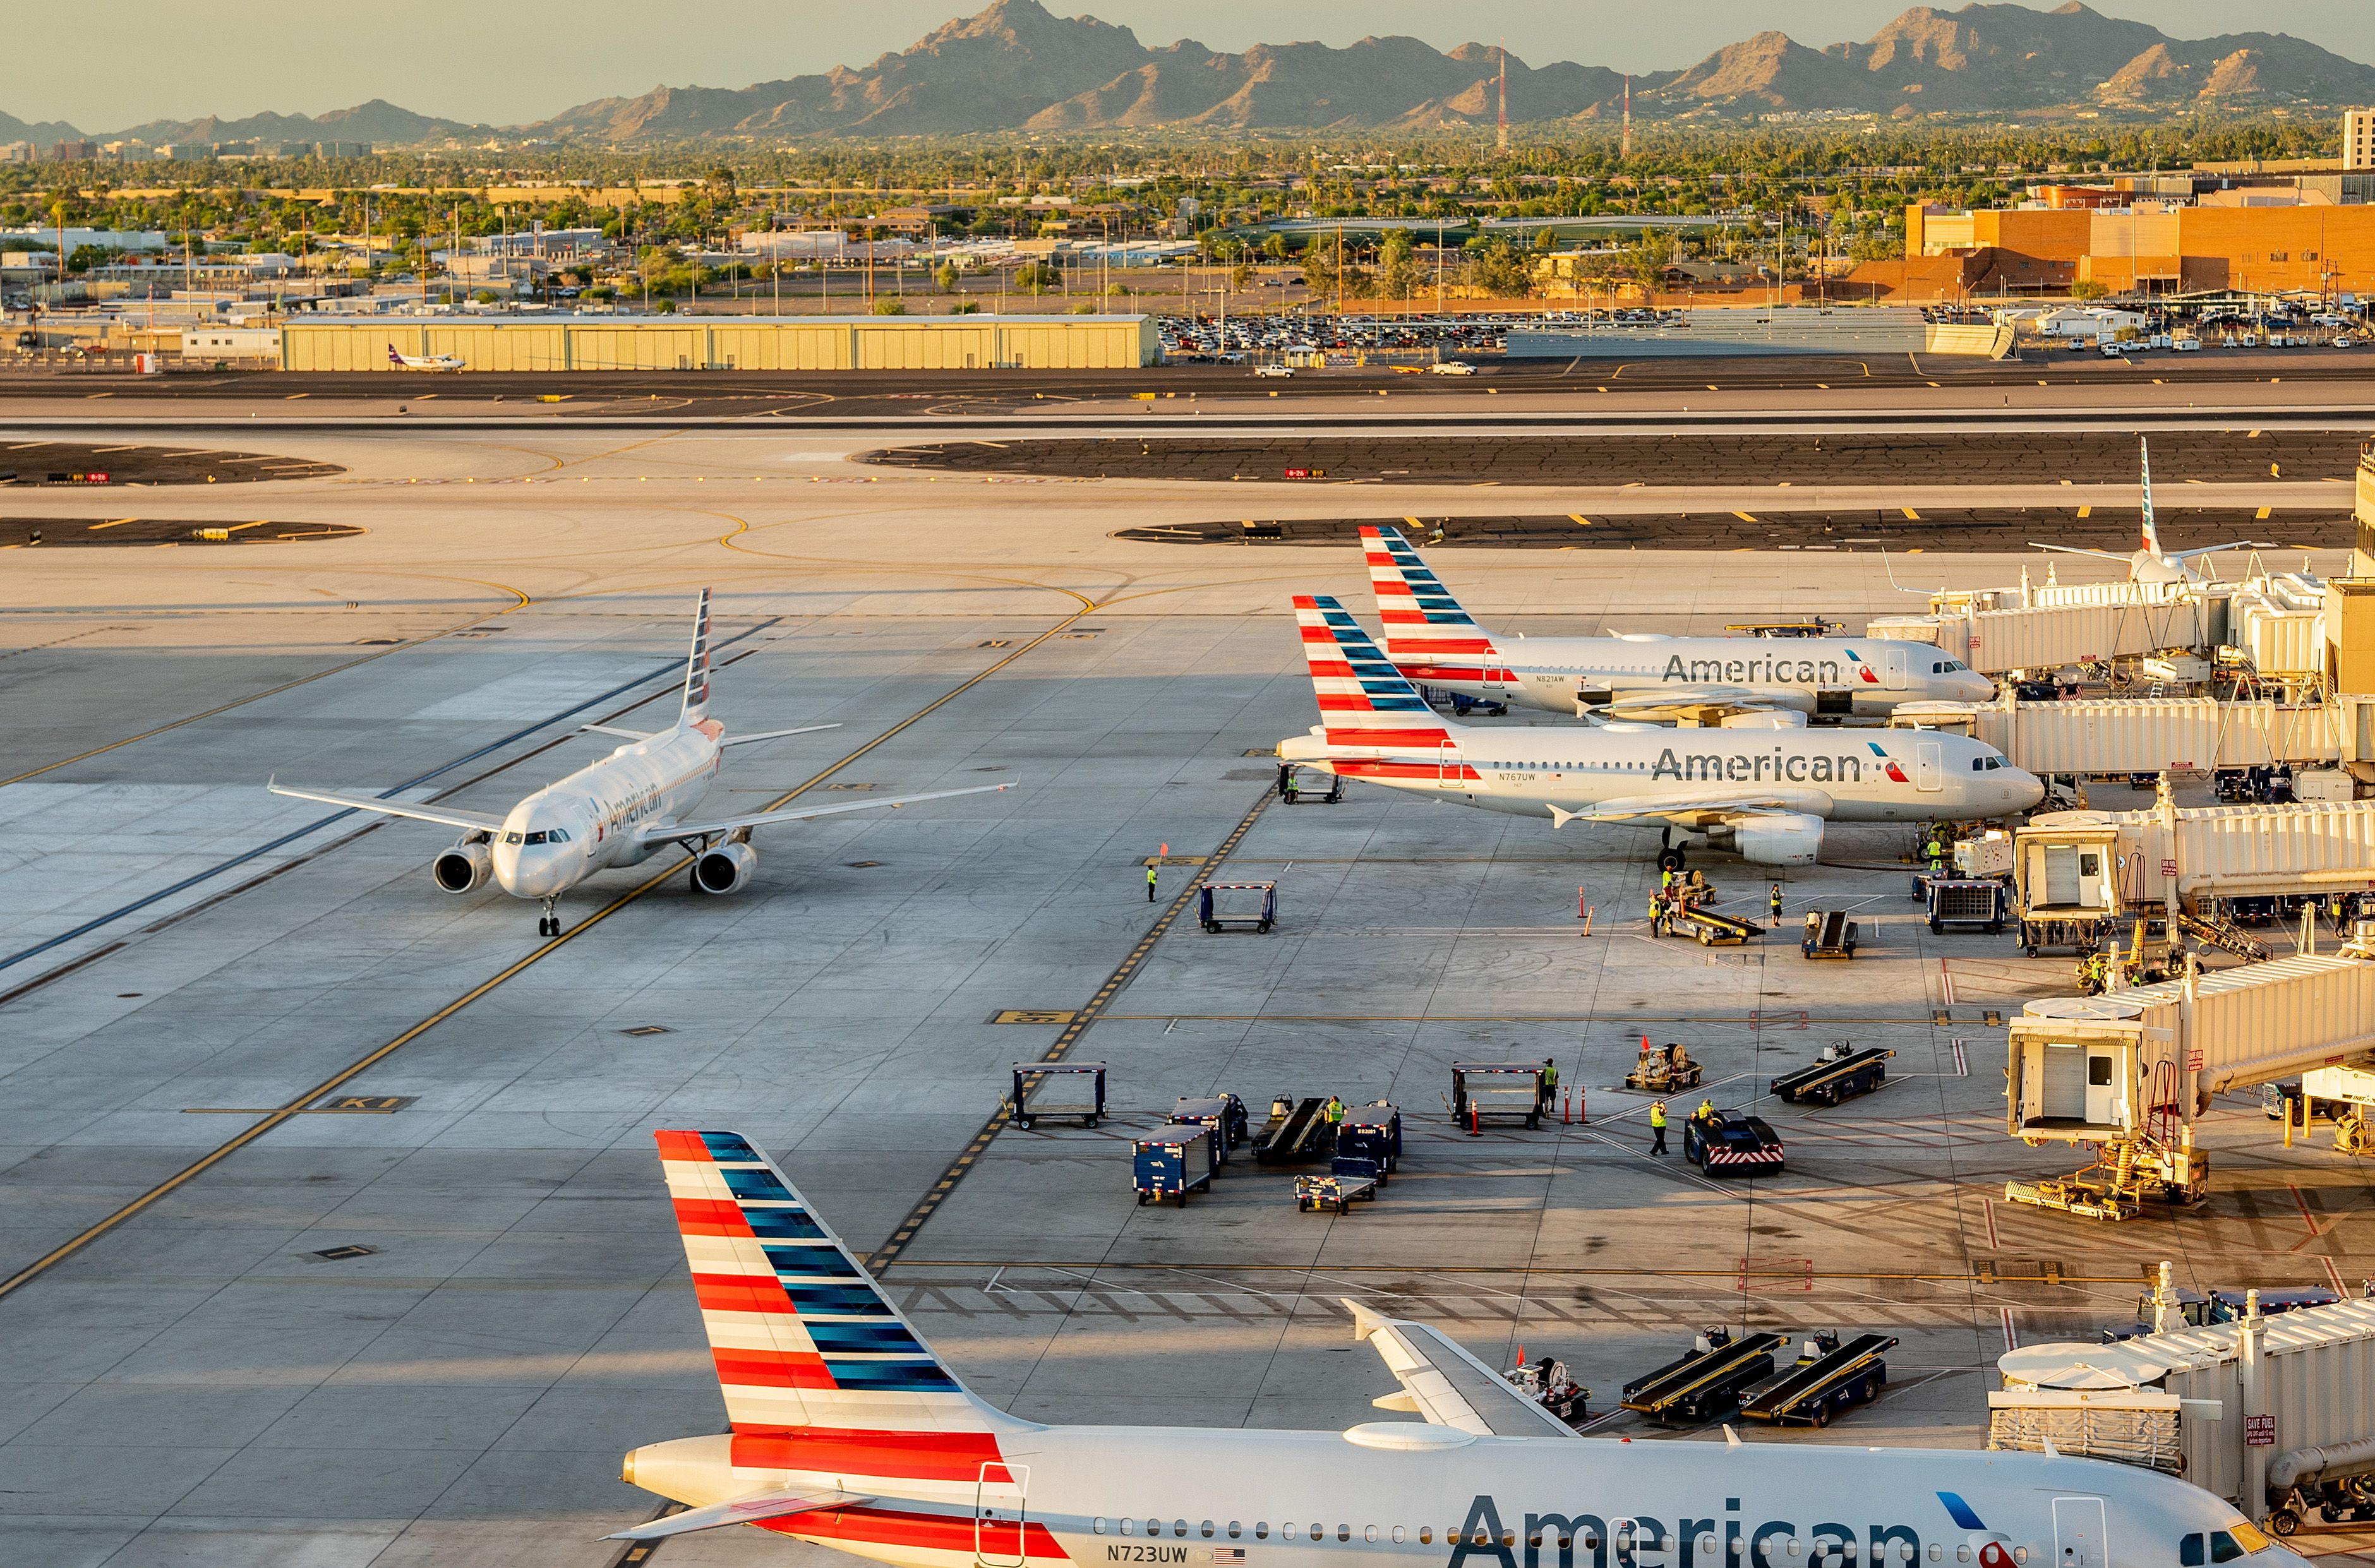 Many American Airlines aircraft lined up at Phoenix Sky Harbor International Airport.